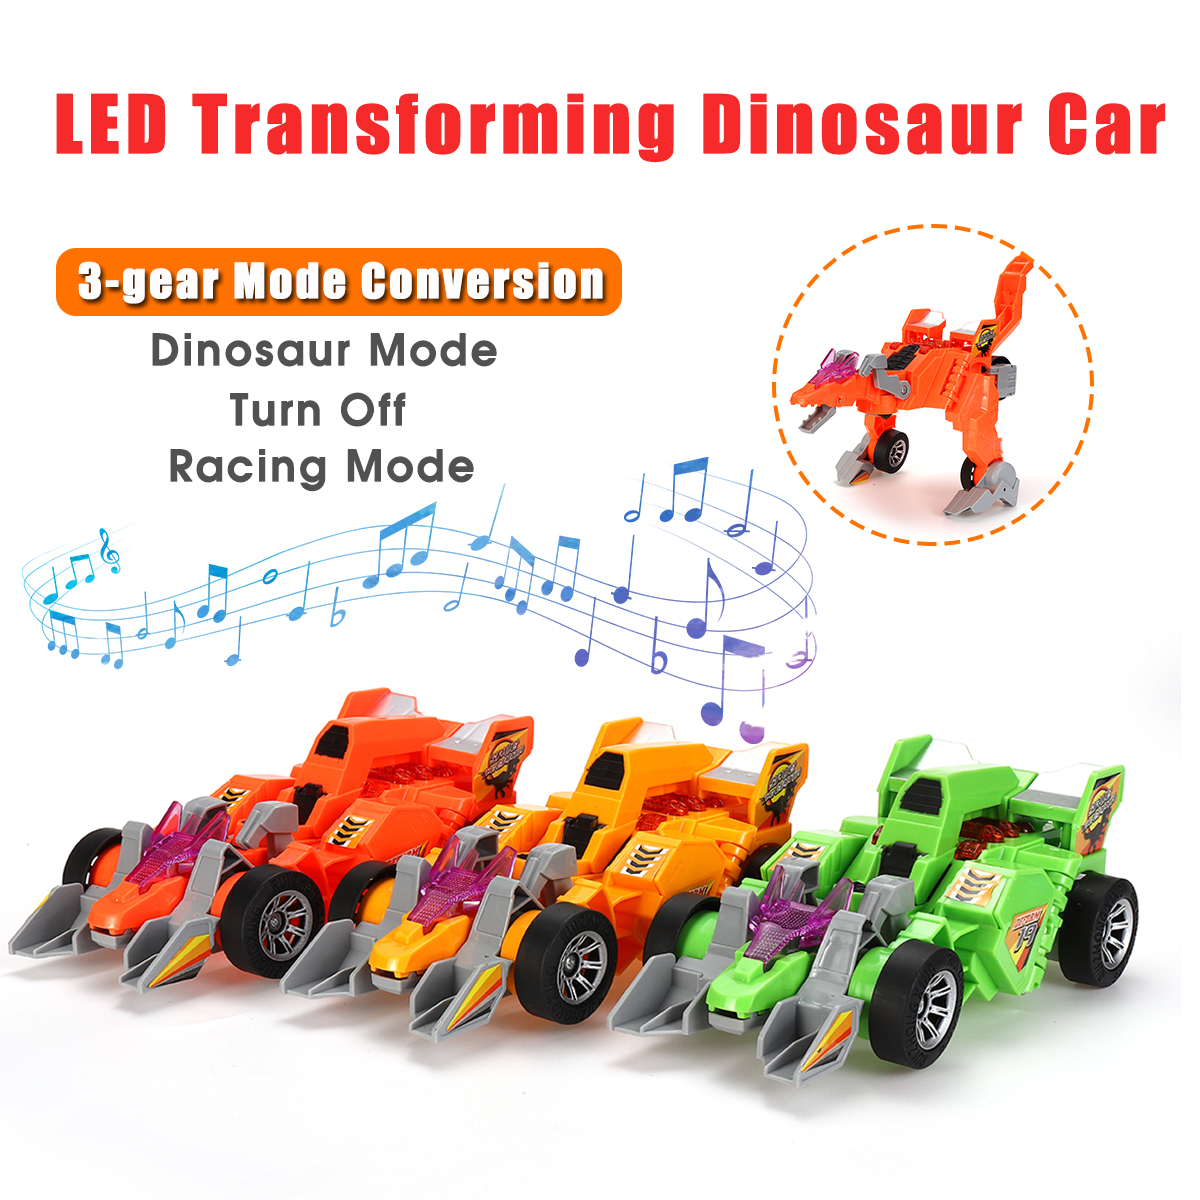 Electric-Transforming-T-Rex-Dinosaur-LED-Car-with-Light-Sound-Diecast-Model-Toy-1591202-1